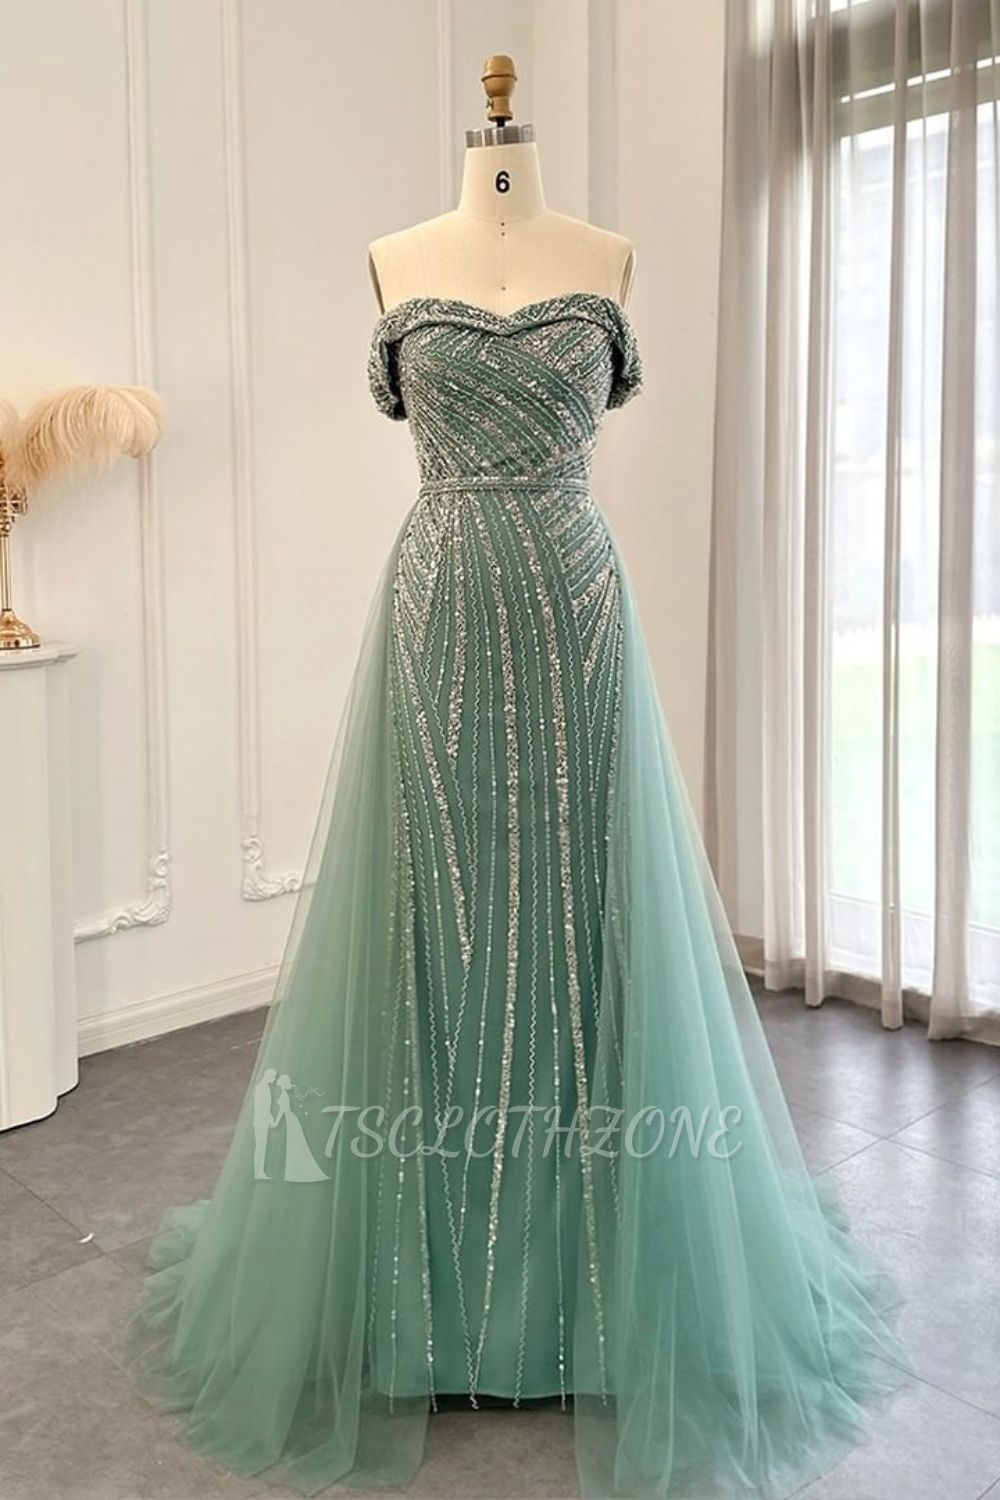 Charming Strapless Beading Mermaid Evening Dress Dubai Tulle Party Gown with Sweep Train